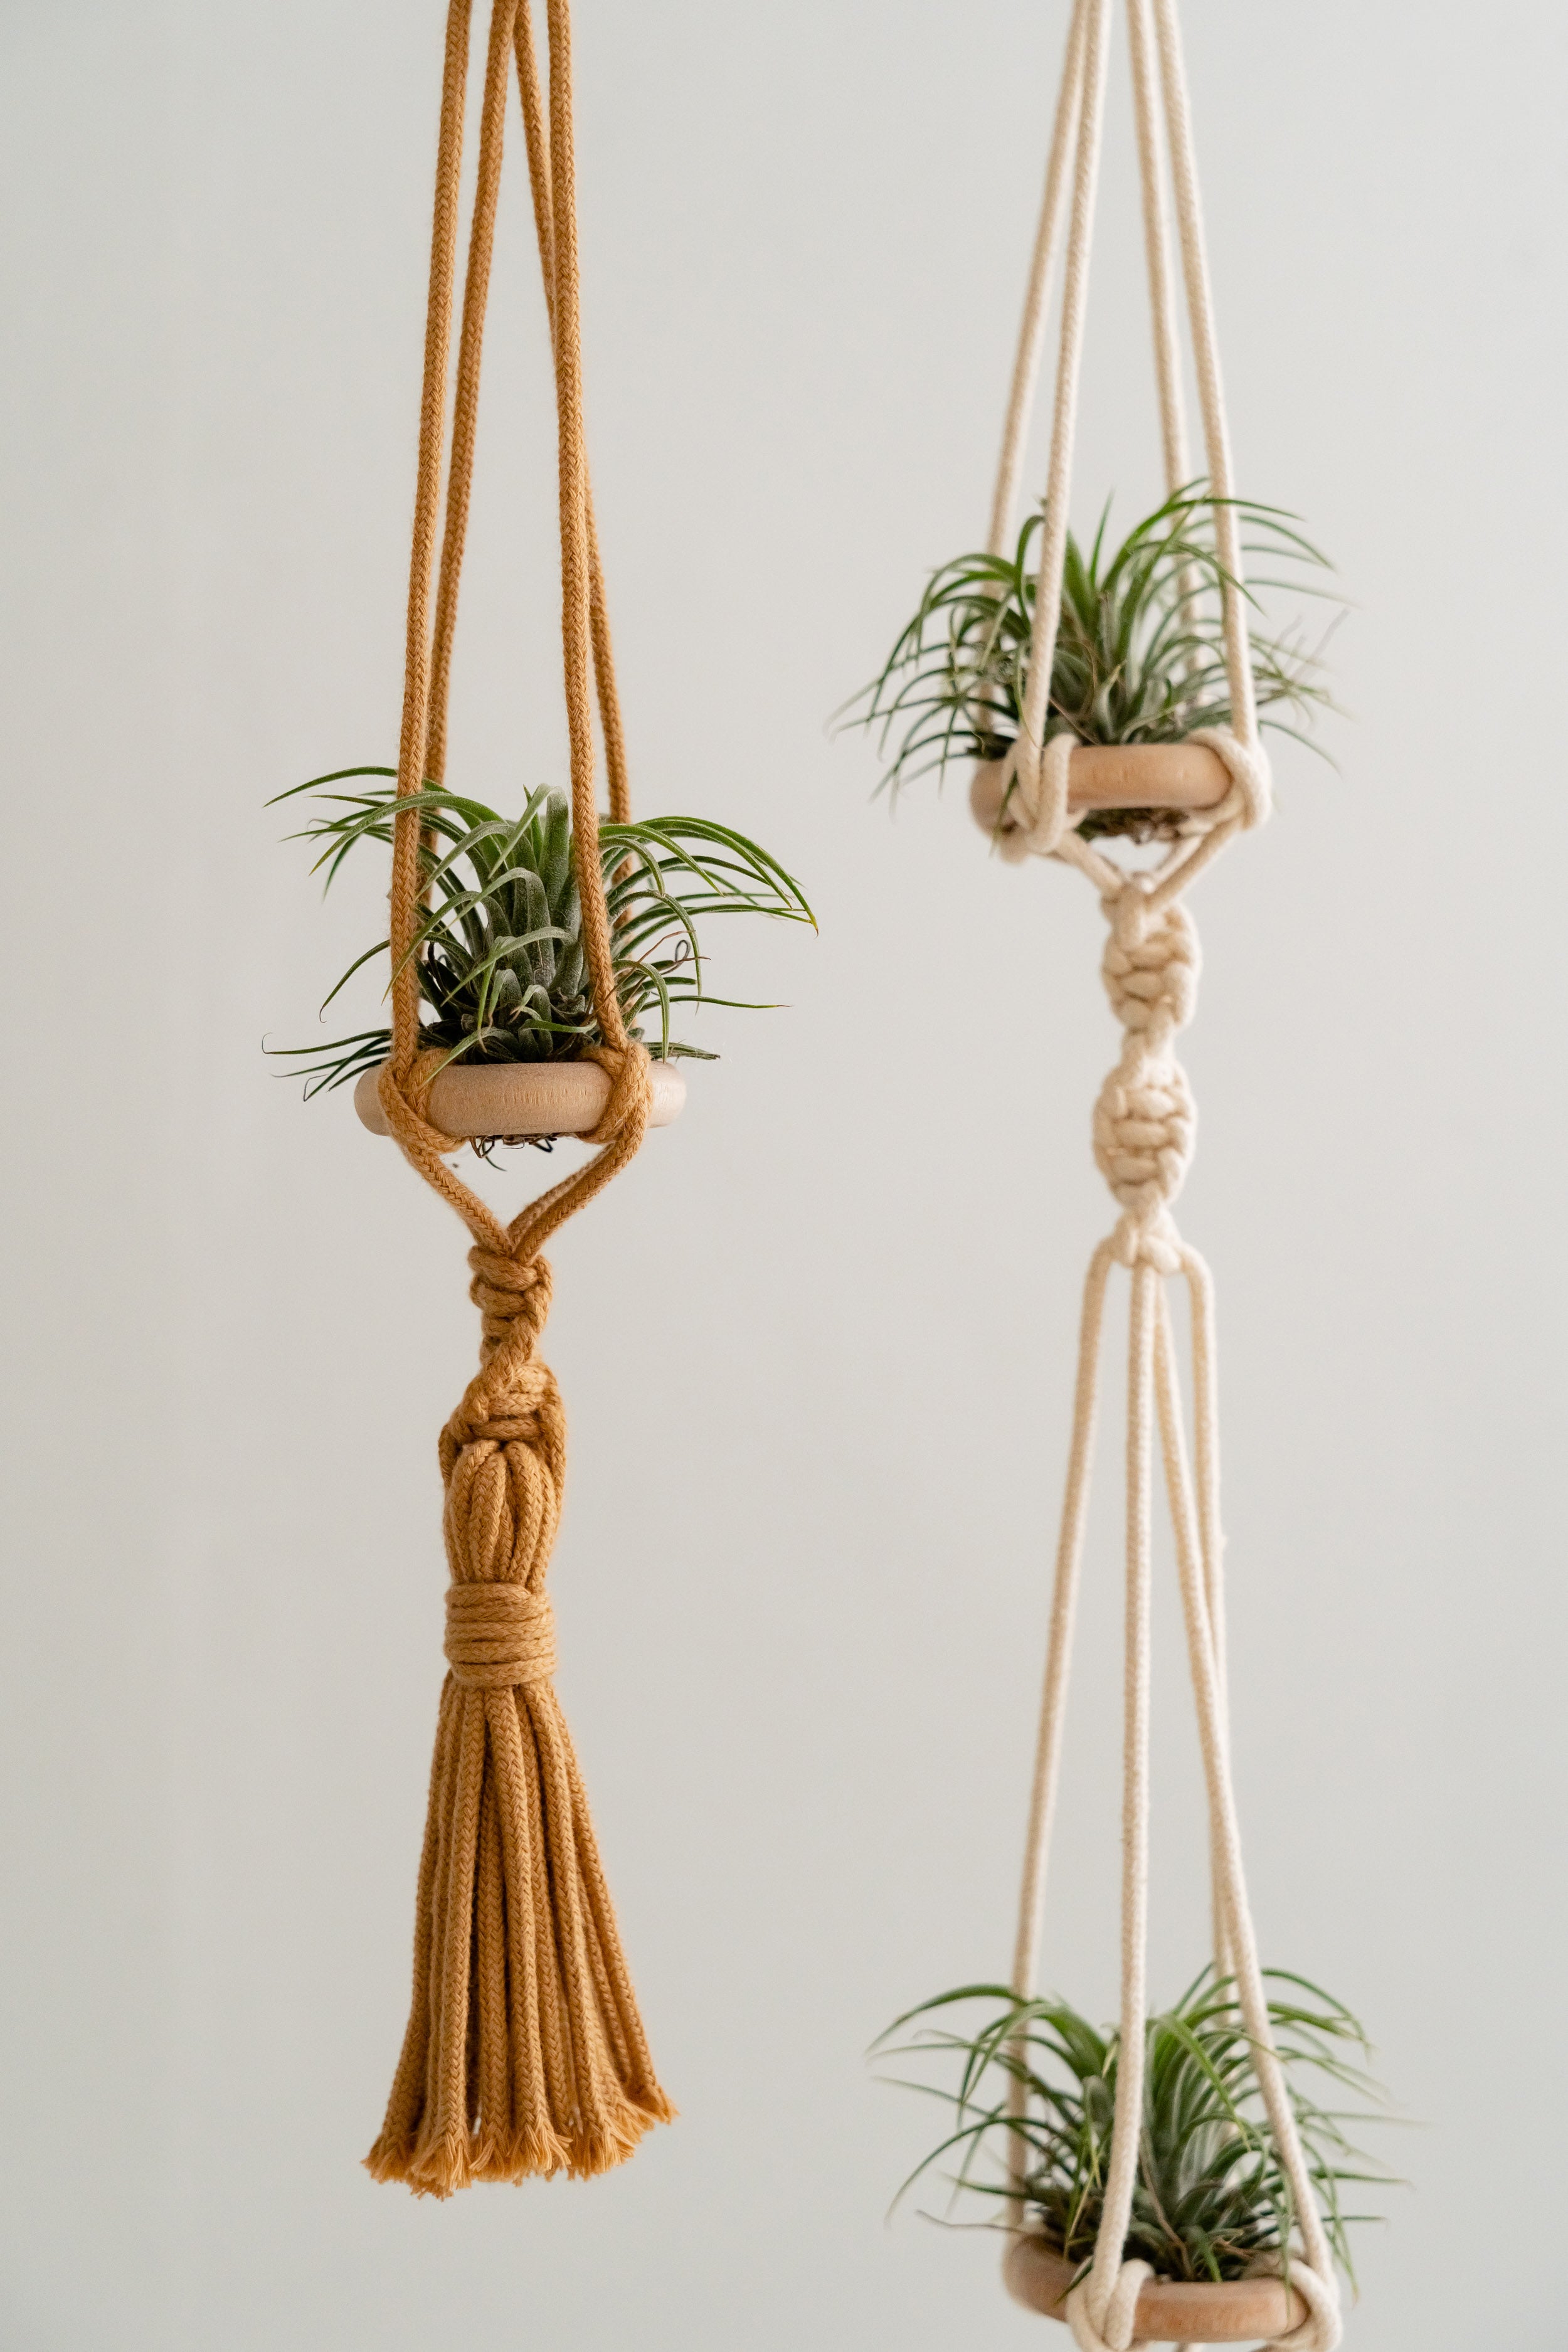 Enhance Your Space with a Macrame Double Plant Hanger for Airplants